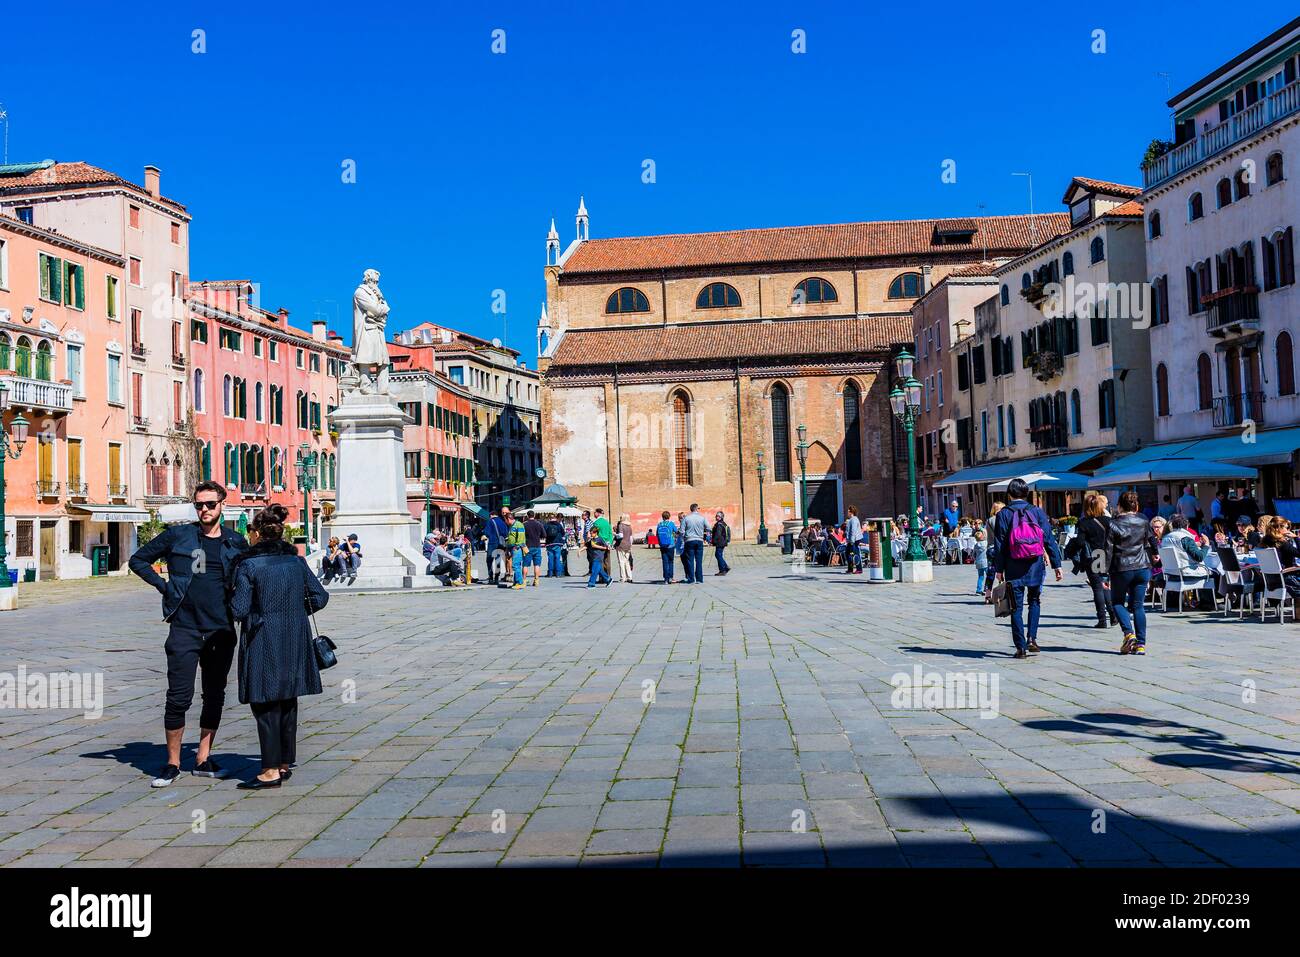 Campo Santo Stefano is a city square near the Ponte dell'Accademia, in the sestiere of San Marco. In the square stands a statue dedicated to Italian l Stock Photo